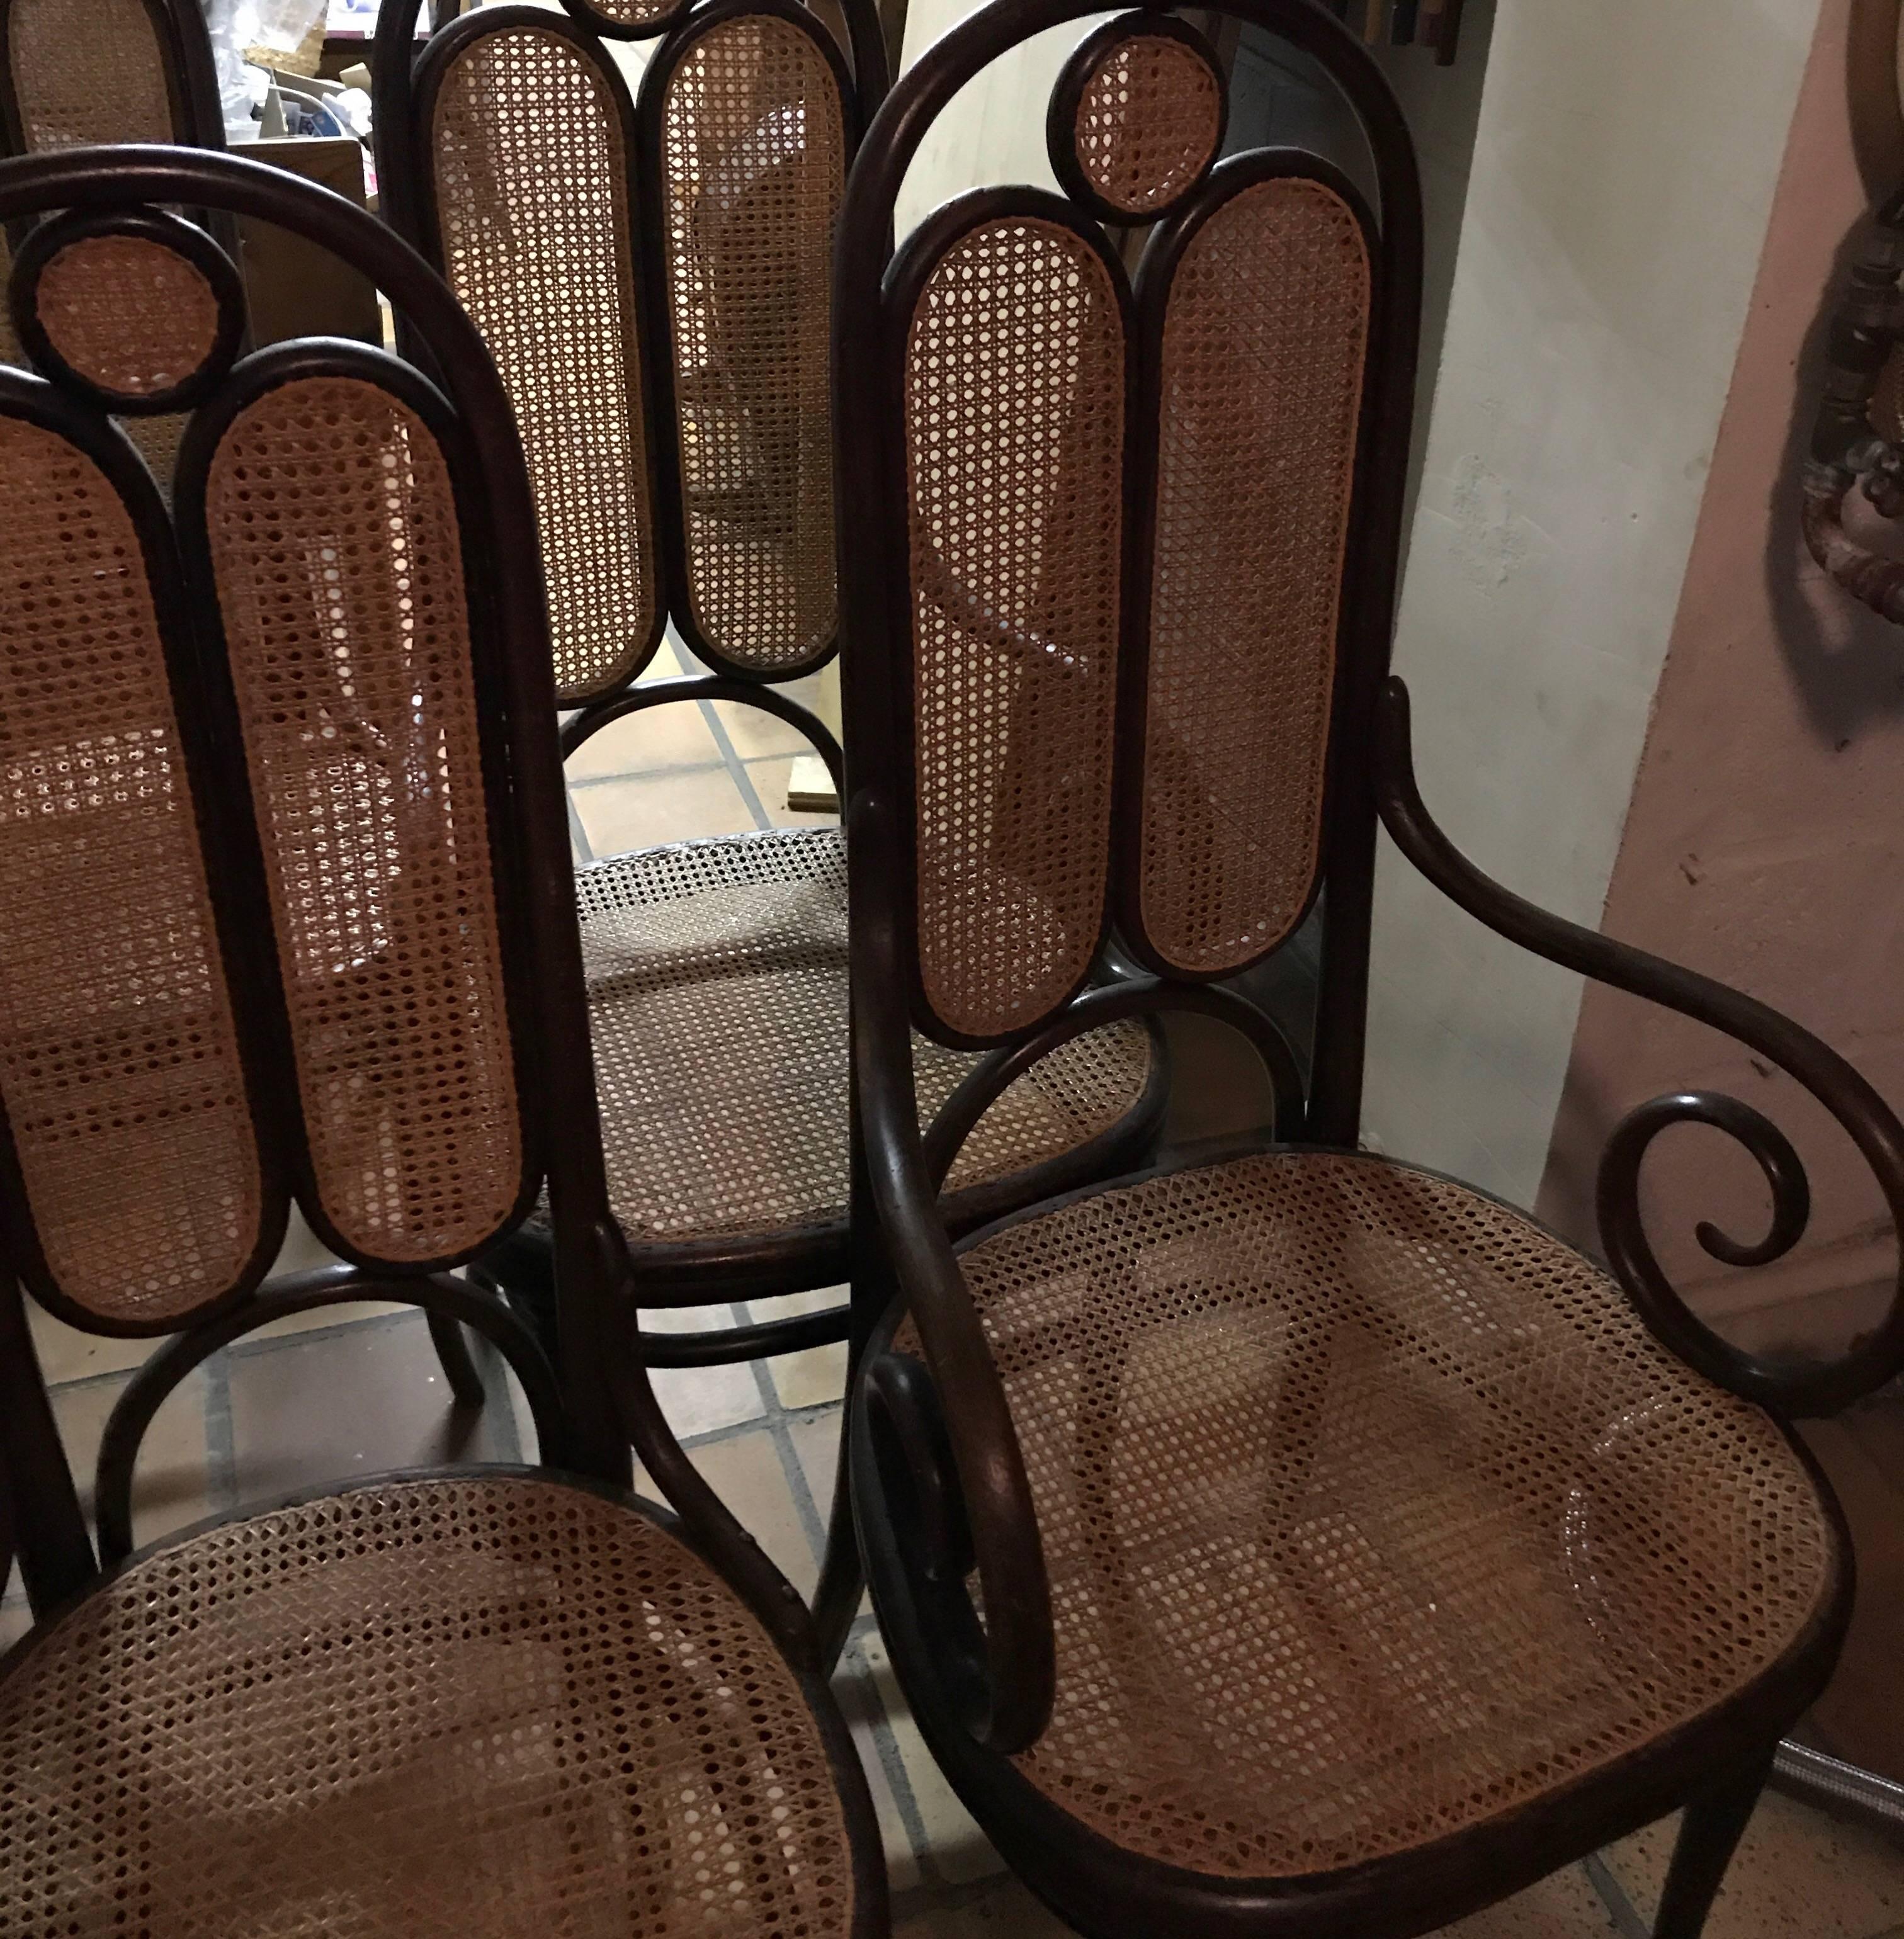 For chairs and two armchairs
Thonet nr 16 or christal palace inspired chairs
1870 labeled and stamped
New caning
Totally original and very rare to find a complete set of the same period
Beechwood in very good condition
Measure: Armchairs 55 x